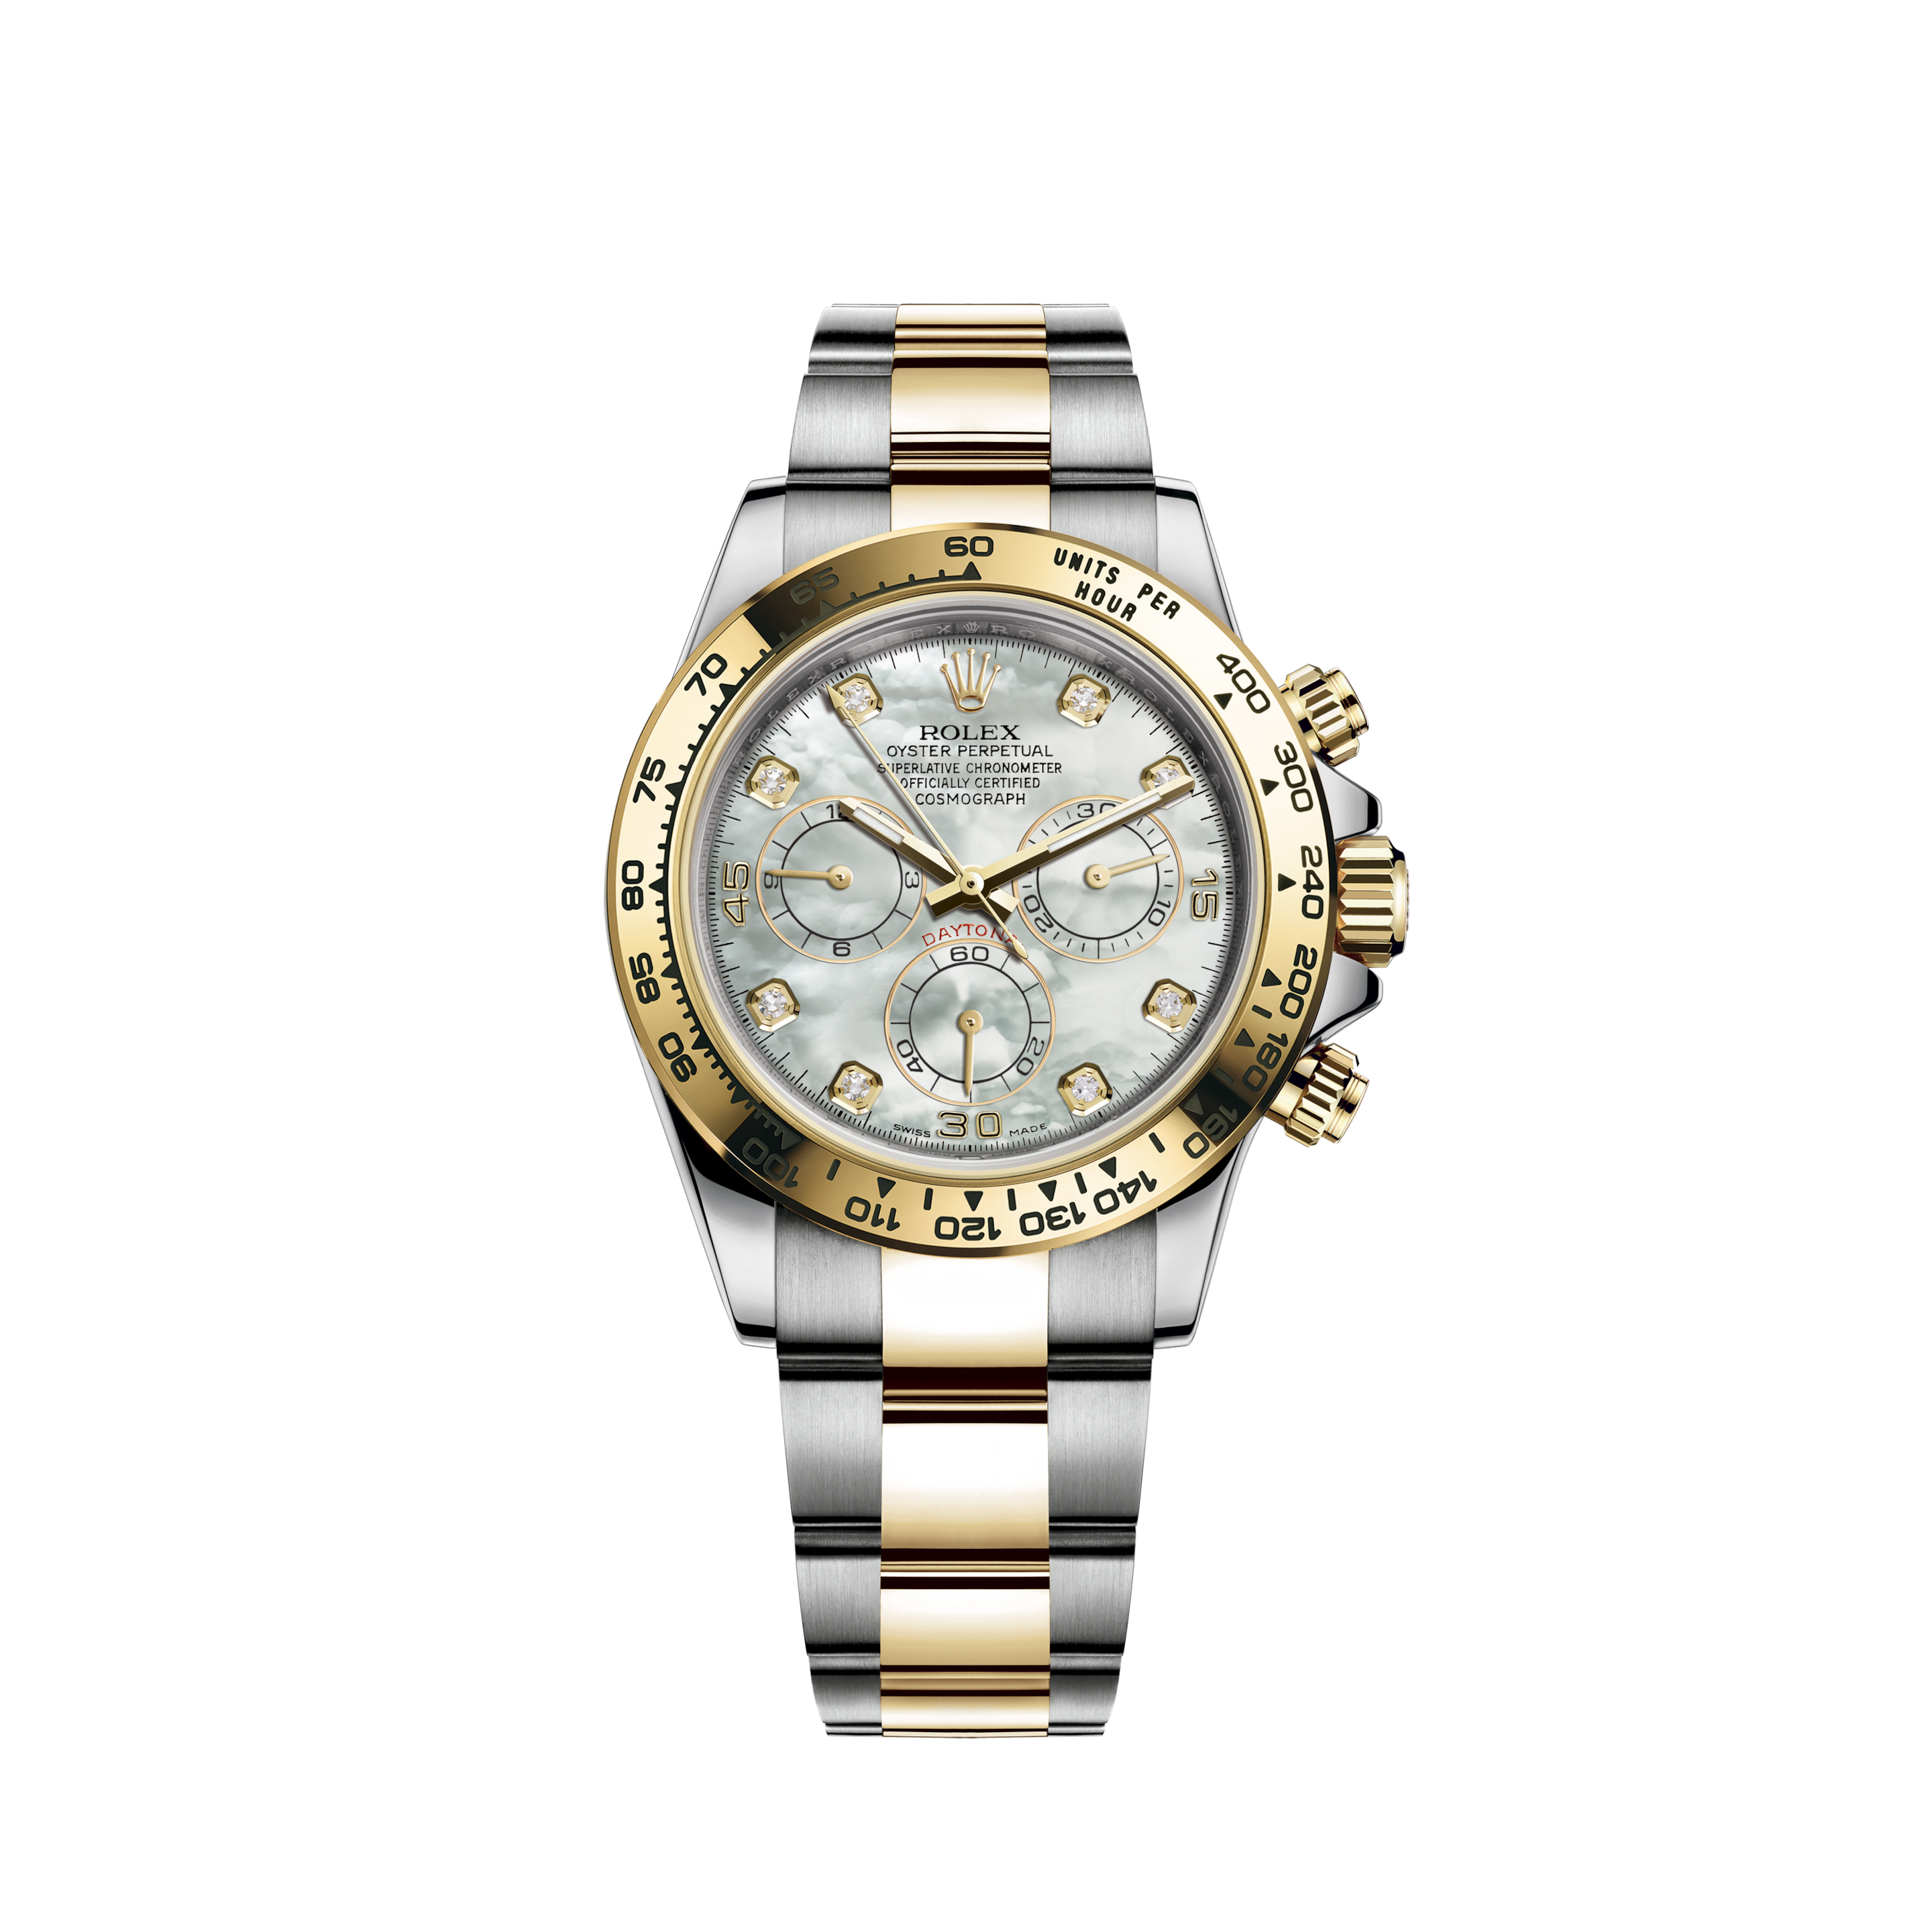 Rolex Oyster Perpetual Datejust 41 in Oystersteel and white gold